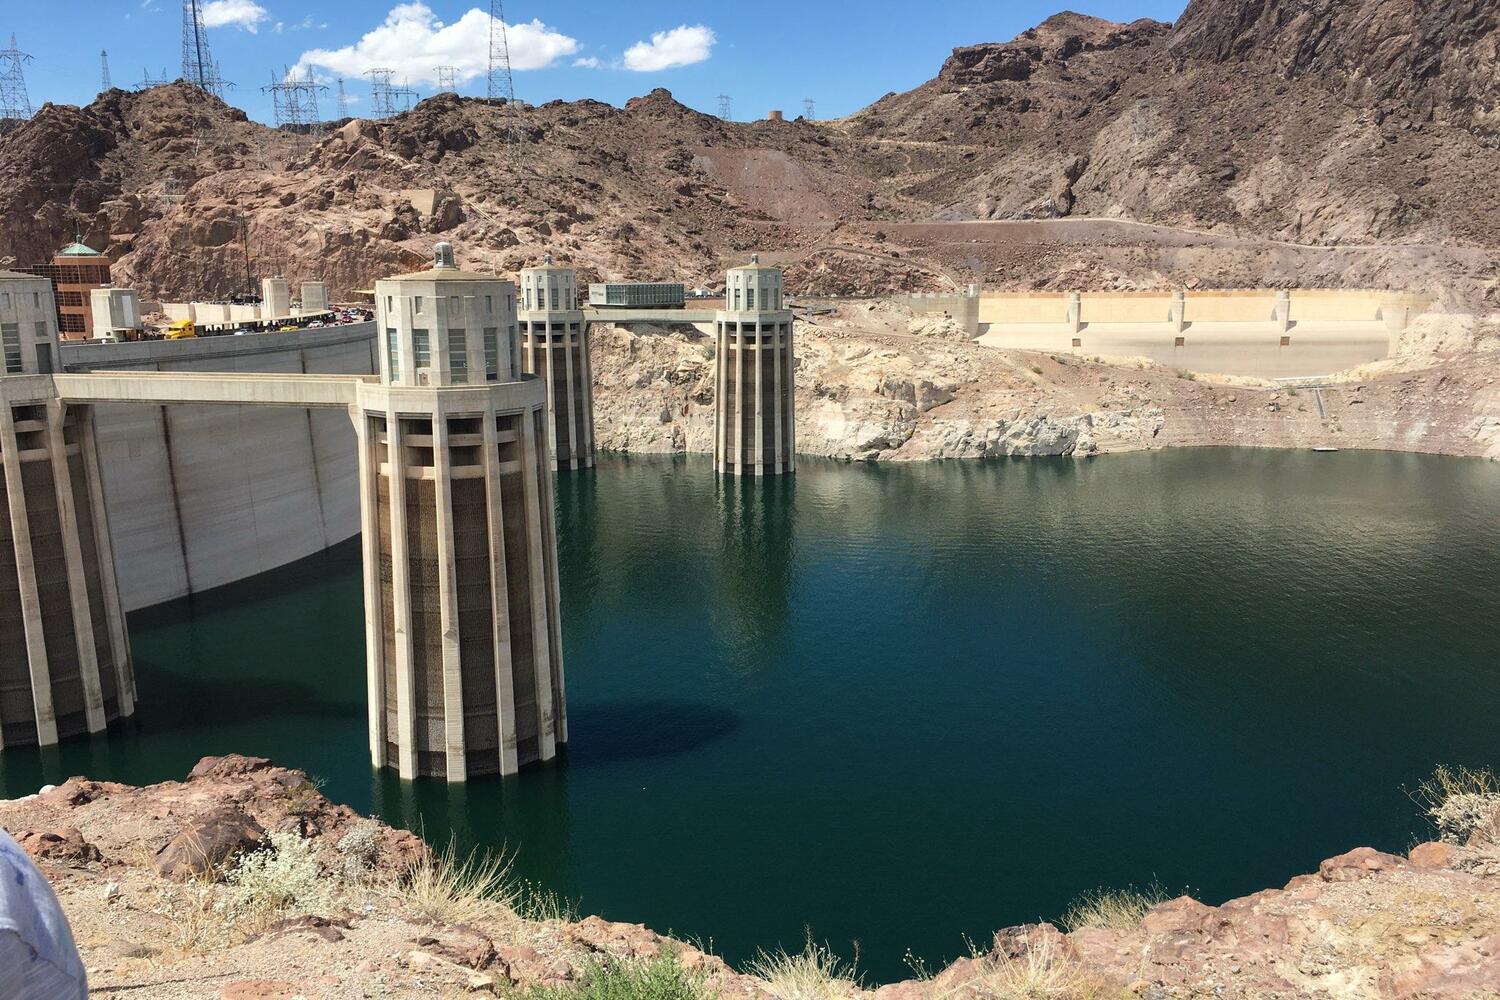 Las Vegas turns on low-level Lake Mead pumps designed to avoid a